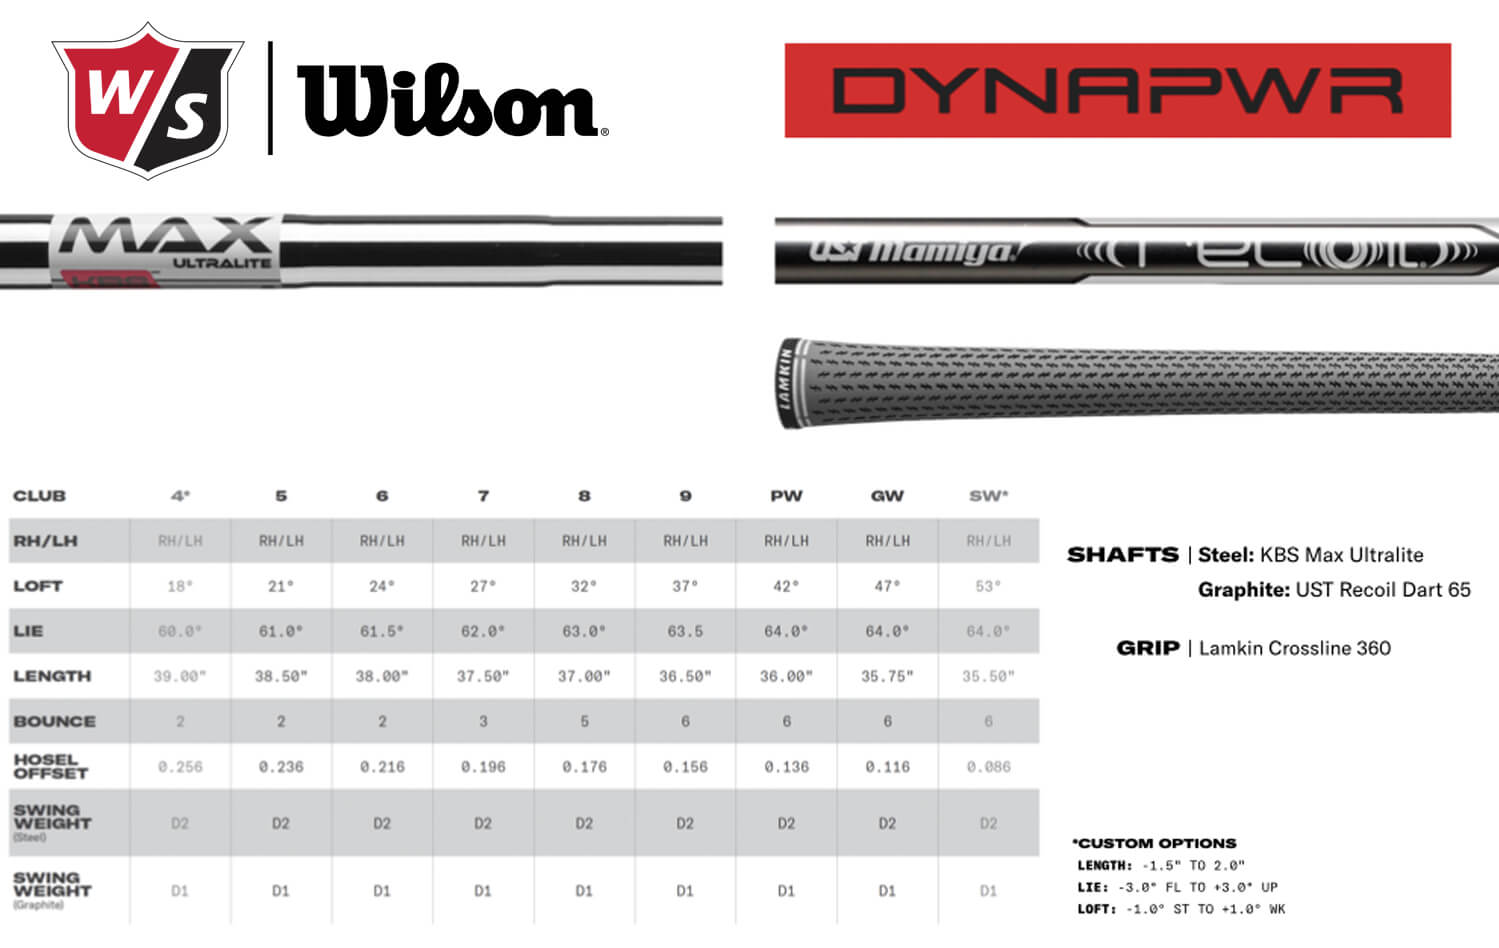 Specification for Wilson Staff Dynapower Golf Irons - Steel